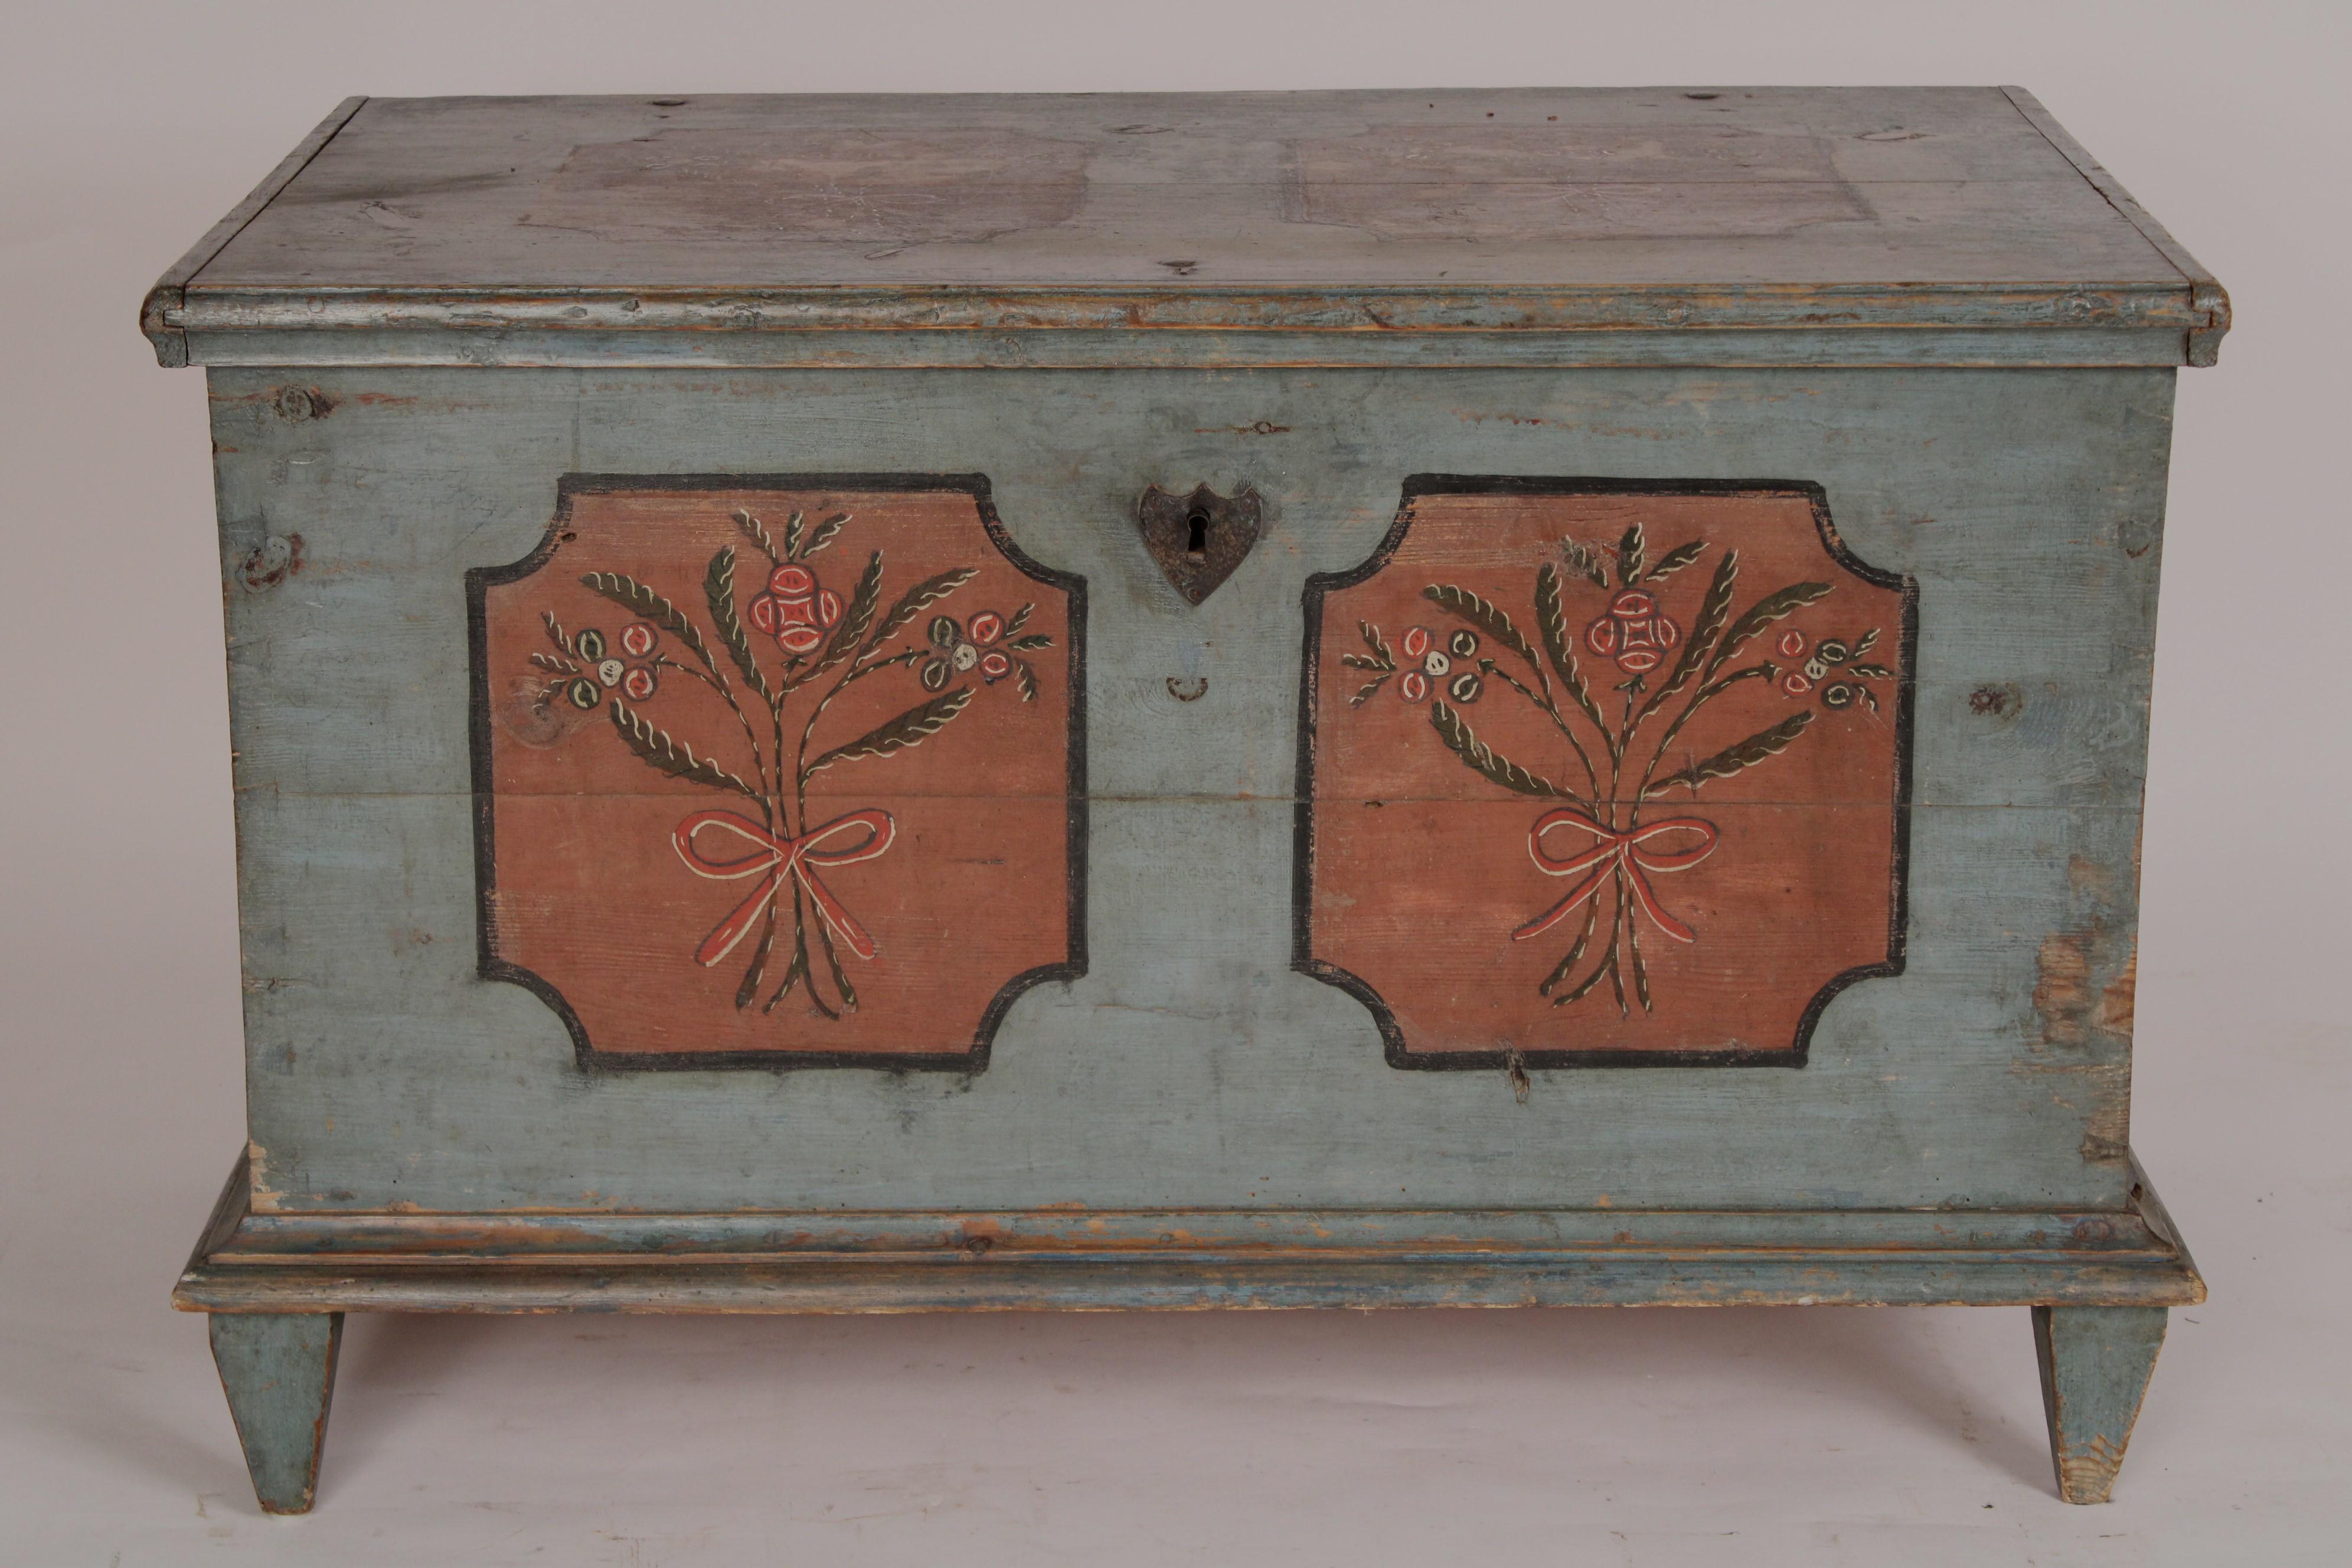 Gustavian painted pine trunk, 19th century. With a rectangular overhanging top with two cartouches inset with floral decoration, the front with painted floral panels and a shield shaped escutcheon, sides with painted floral panels, resting on square